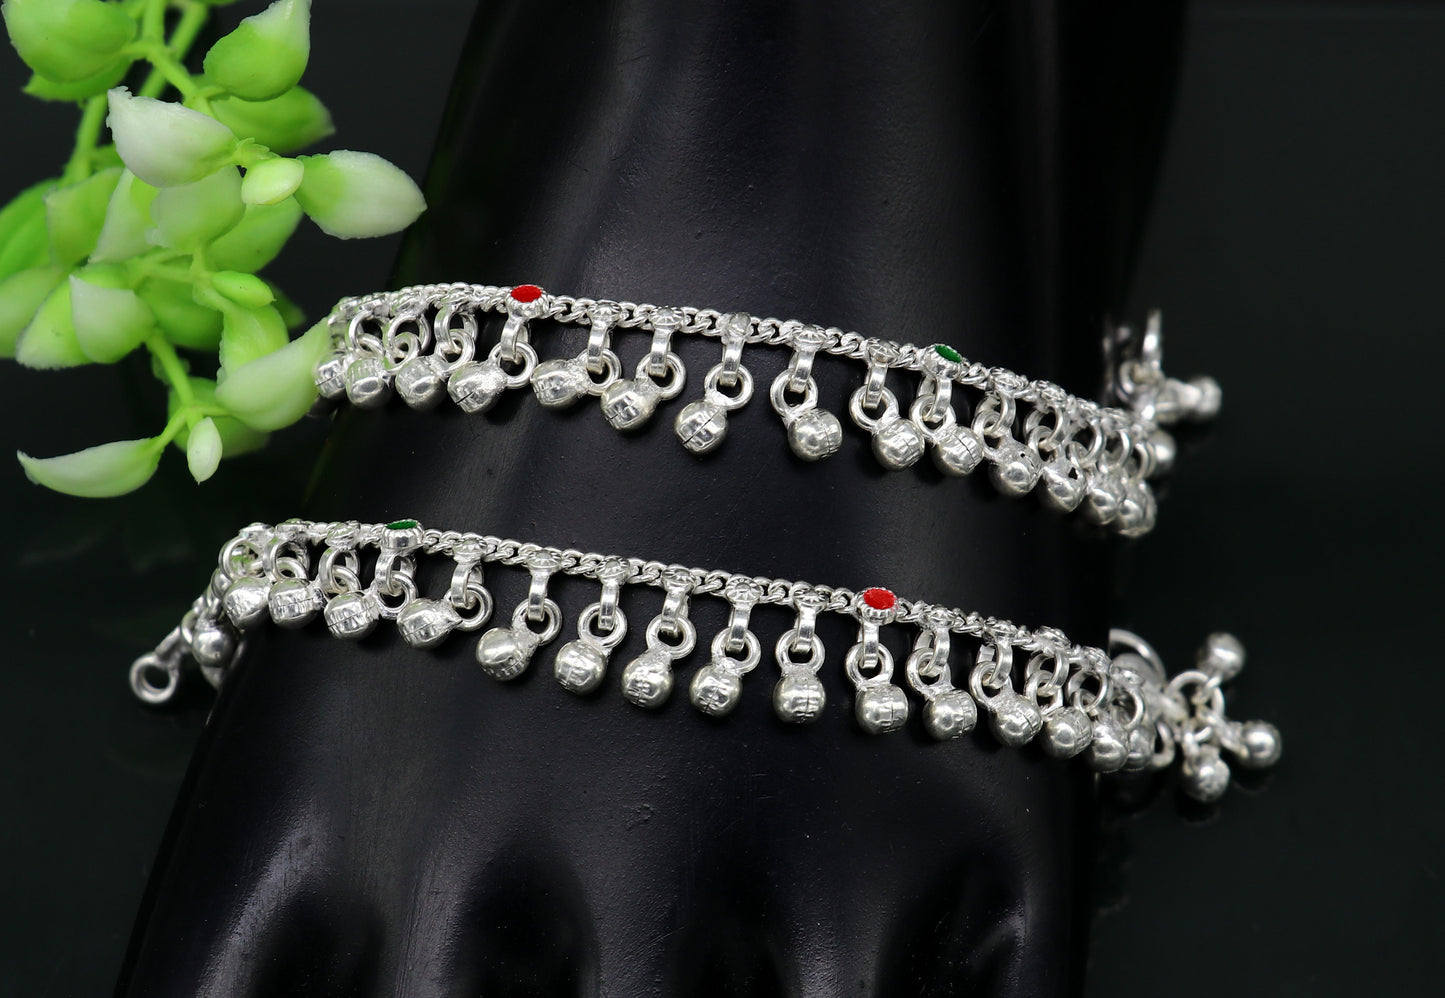 5.5" handmade solid sterling silver waved jingling bells noisy anklets, excellent gifting baby foot bracelet charm kids jewelry ank358 - TRIBAL ORNAMENTS